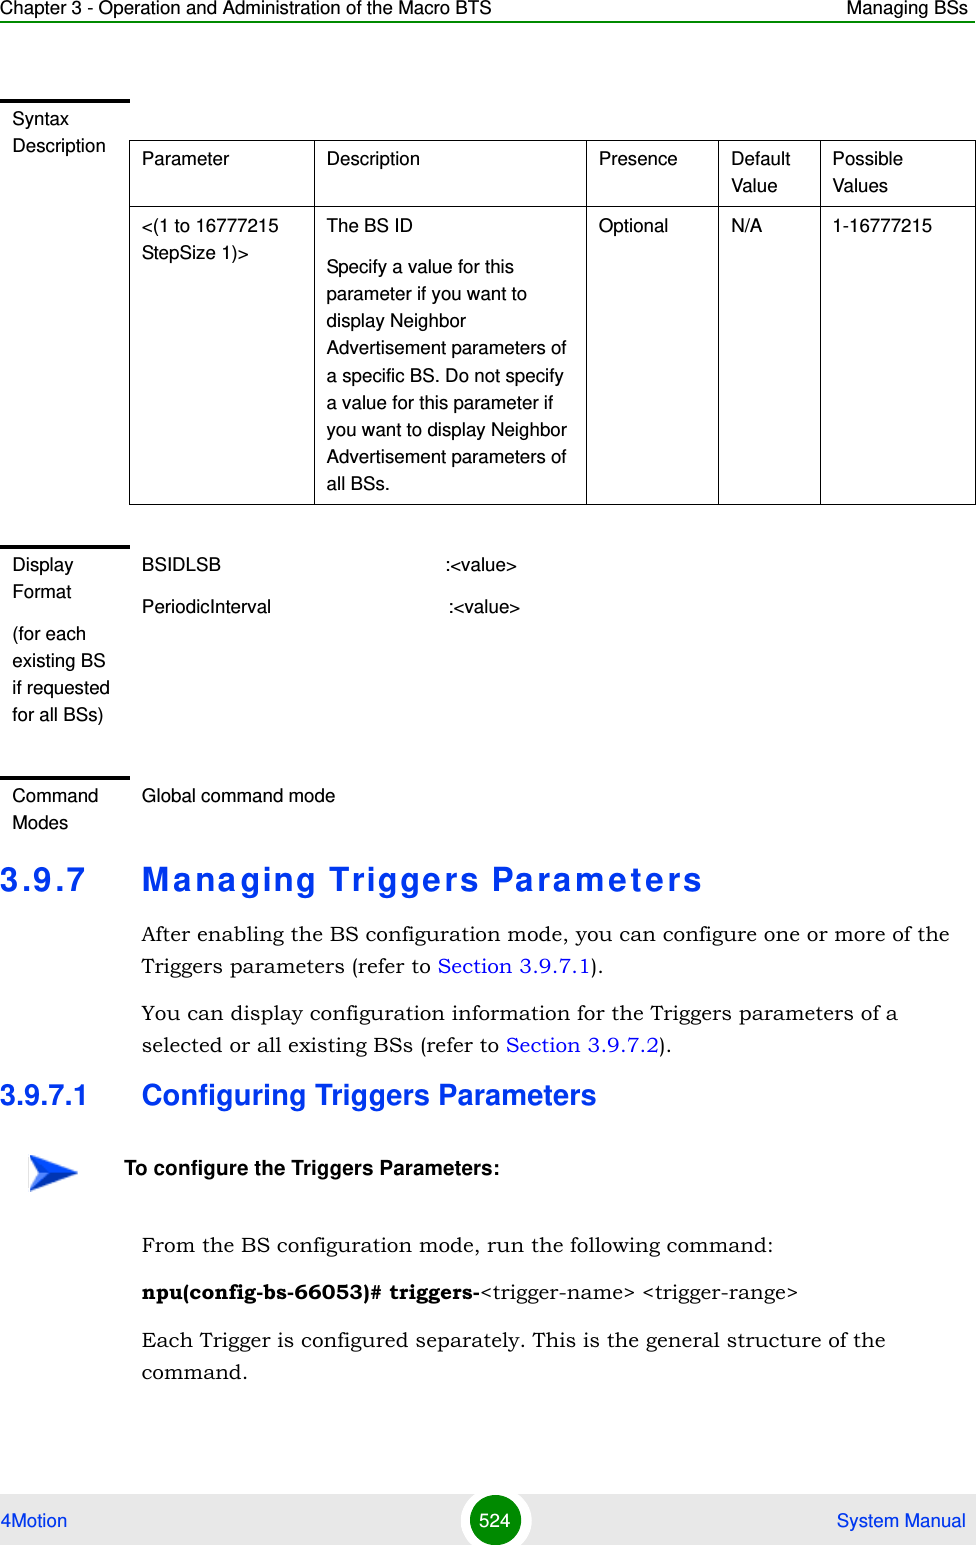 Chapter 3 - Operation and Administration of the Macro BTS Managing BSs4Motion 524  System Manual3.9 .7 Ma na ging Triggers ParametersAfter enabling the BS configuration mode, you can configure one or more of the Triggers parameters (refer to Section 3.9.7.1).You can display configuration information for the Triggers parameters of a selected or all existing BSs (refer to Section 3.9.7.2).3.9.7.1 Configuring Triggers ParametersFrom the BS configuration mode, run the following command:npu(config-bs-66053)# triggers-&lt;trigger-name&gt; &lt;trigger-range&gt;Each Trigger is configured separately. This is the general structure of the command.Syntax Description Parameter Description Presence Default ValuePossible Values&lt;(1 to 16777215 StepSize 1)&gt;The BS ID Specify a value for this parameter if you want to display Neighbor Advertisement parameters of a specific BS. Do not specify a value for this parameter if you want to display Neighbor Advertisement parameters of all BSs.Optional N/A 1-16777215Display Format(for each existing BS if requested for all BSs)BSIDLSB                                           :&lt;value&gt;PeriodicInterval                                  :&lt;value&gt;Command ModesGlobal command modeTo configure the Triggers Parameters: